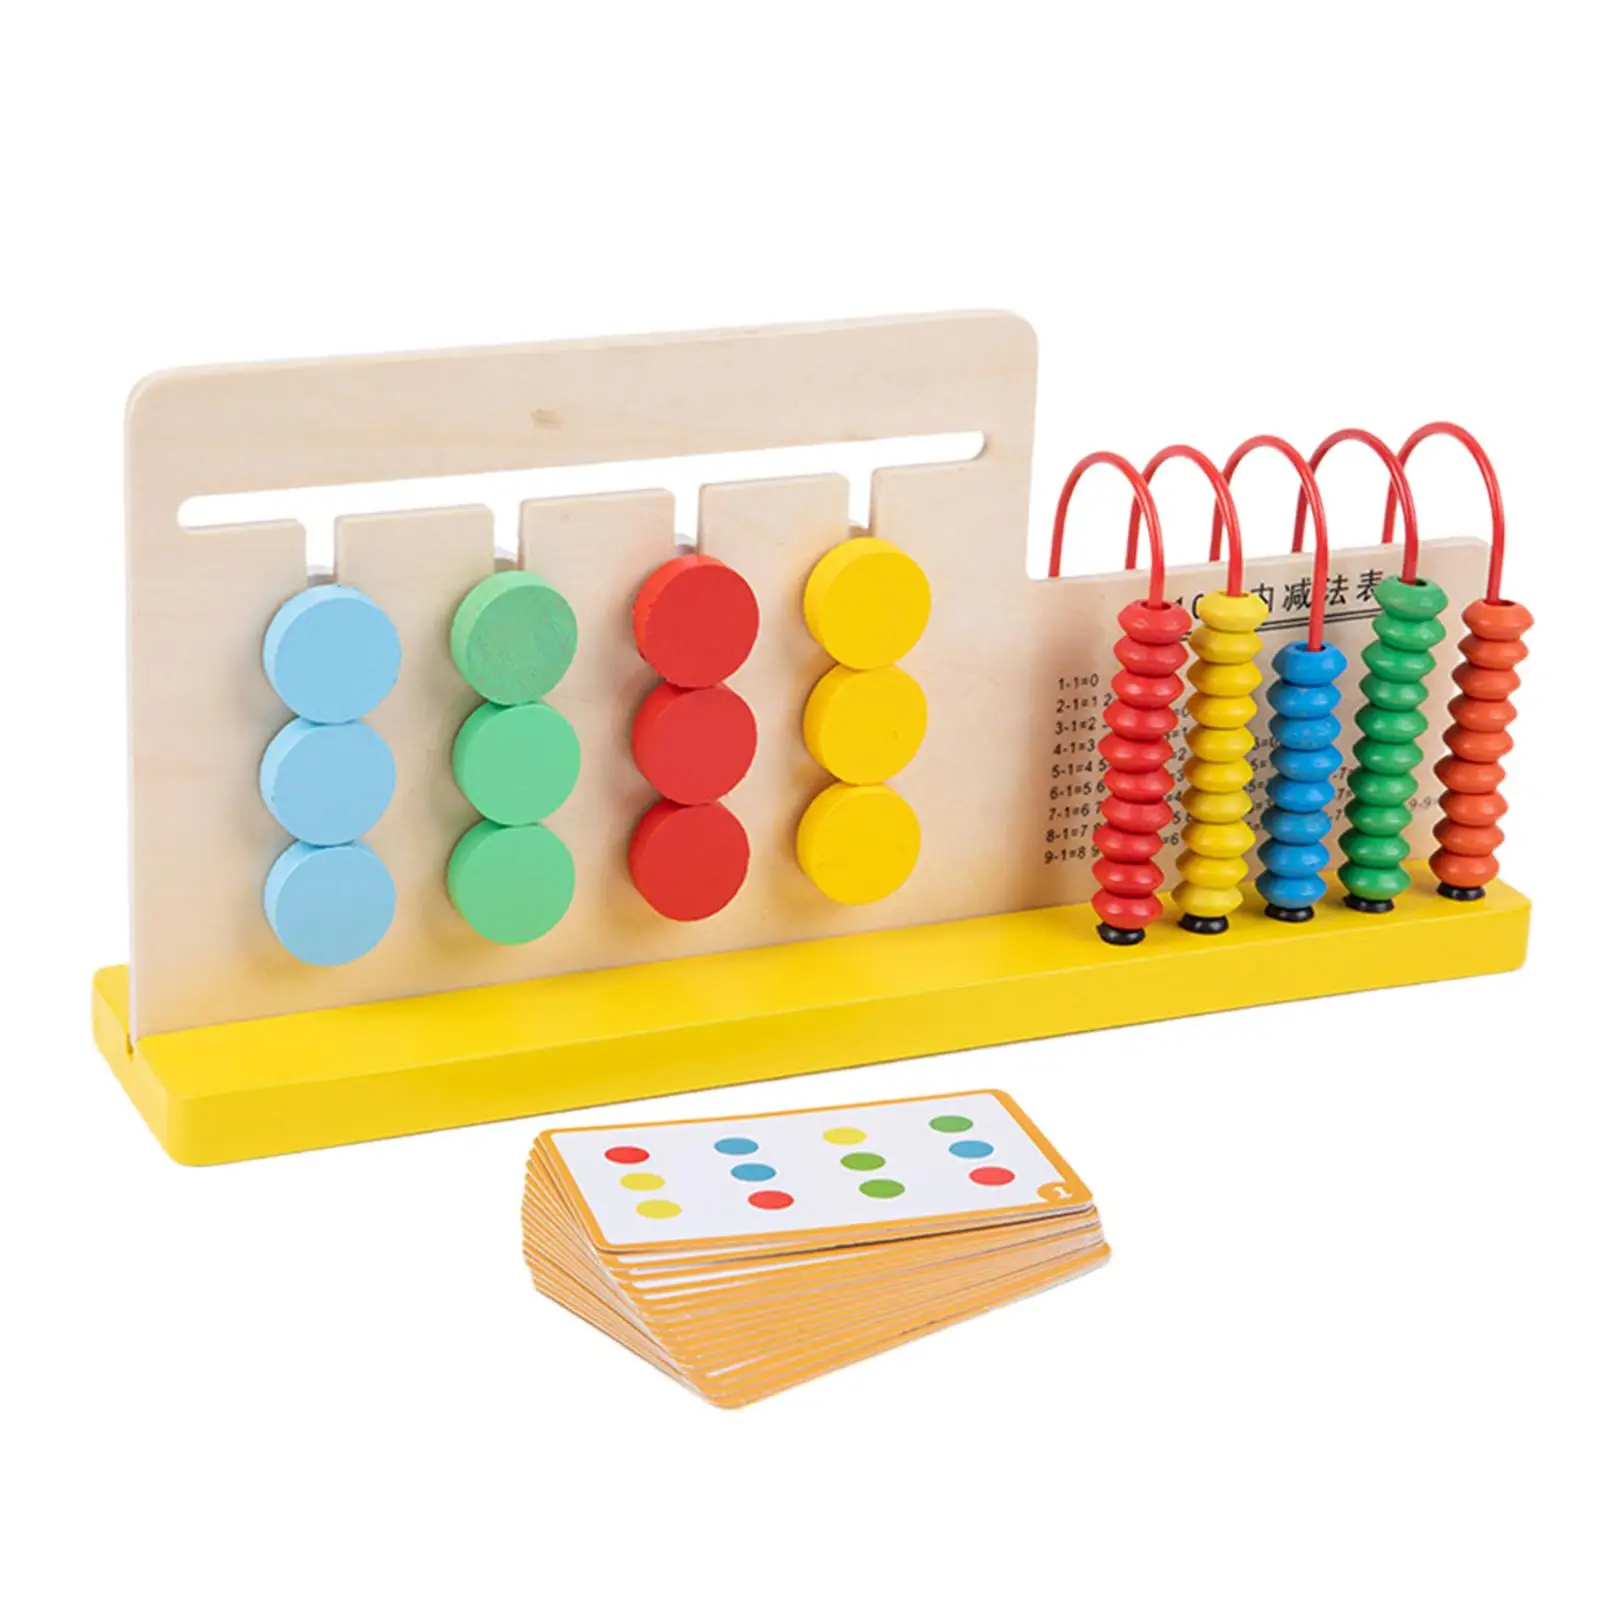 Slide Puzzle Colorful Bead Frame Abacus Brain Teasers Early Educational Abacus Counting Beads Birthday Gift Ages 3 4 Years Old